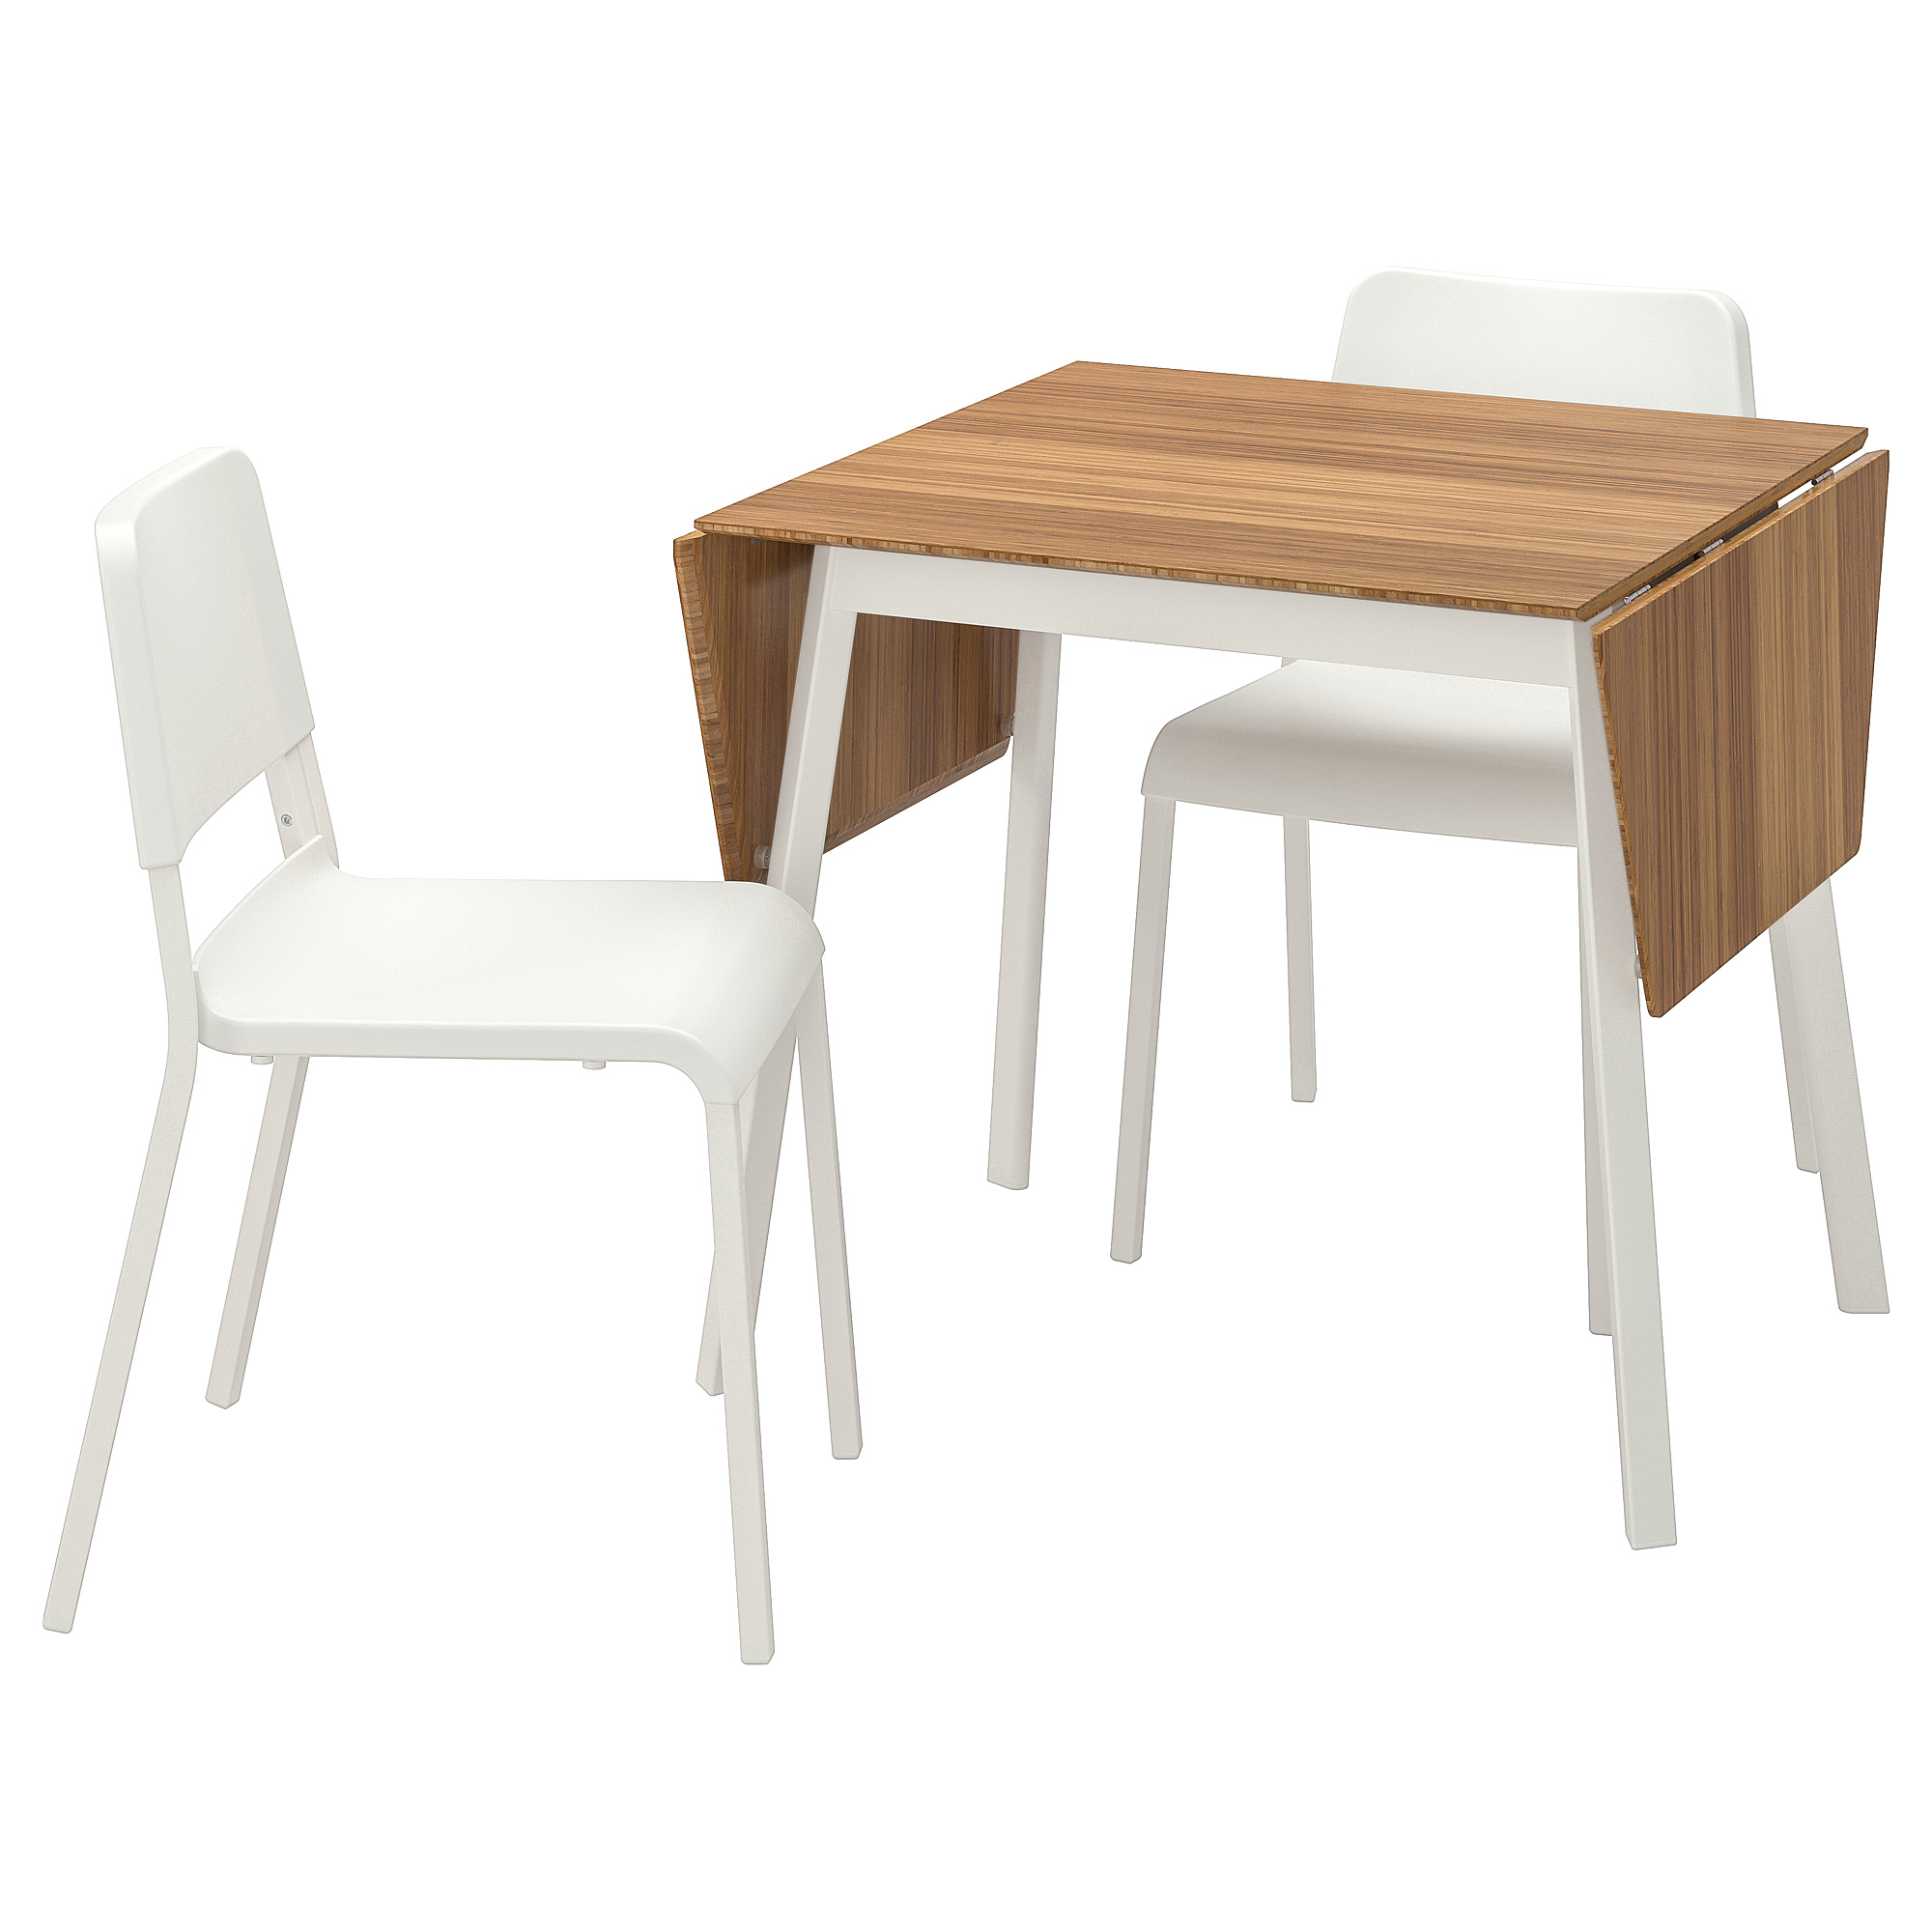 IKEA PS 2012/TEODORES table and 2 chairs